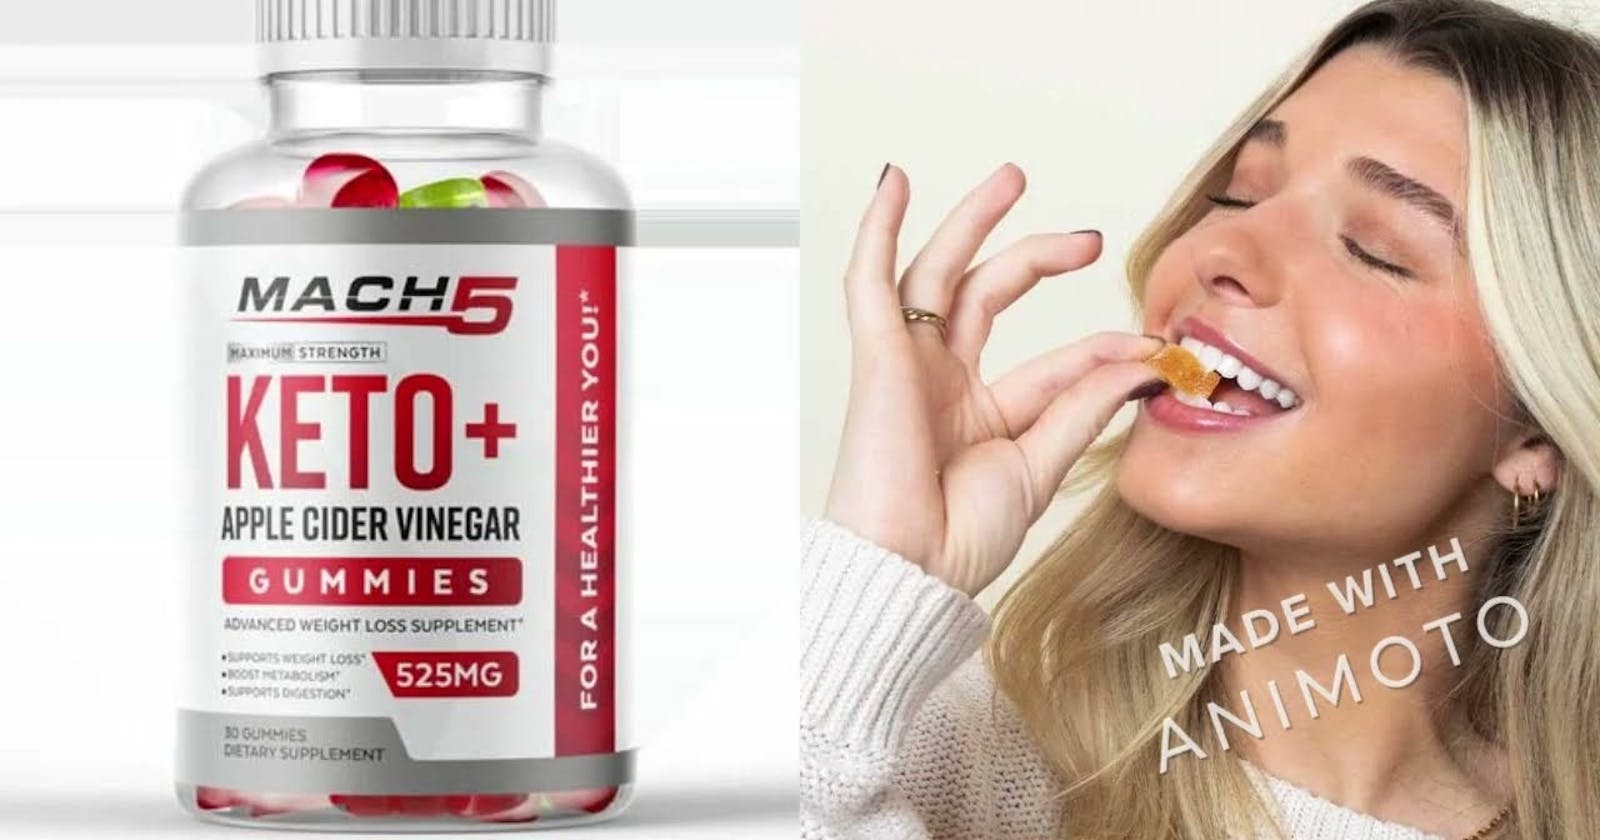 Mach5 Keto ACV Gummies – Price, Reviews, Ingredients & Side Effects (USA)